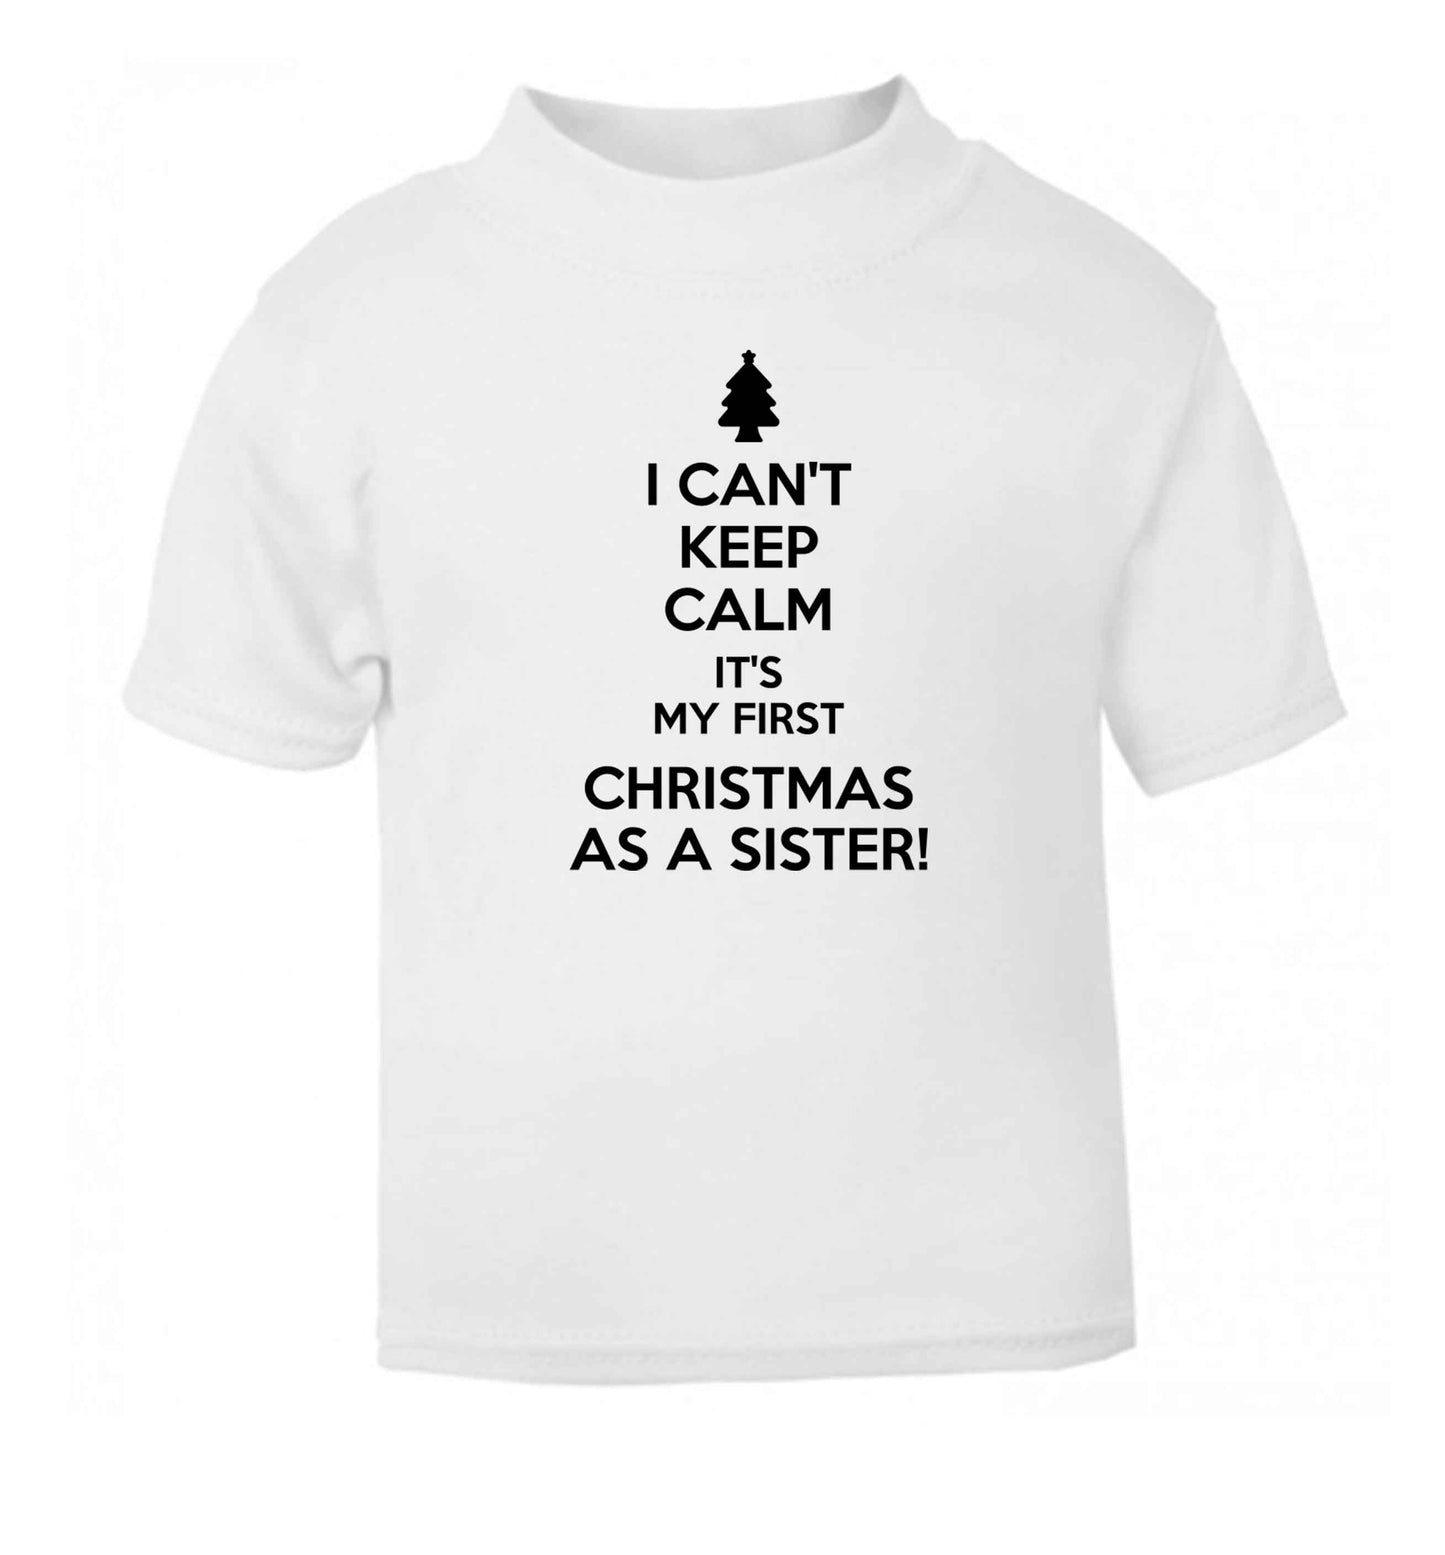 I can't keep calm it's my first Christmas as a sister! white Baby Toddler Tshirt 2 Years